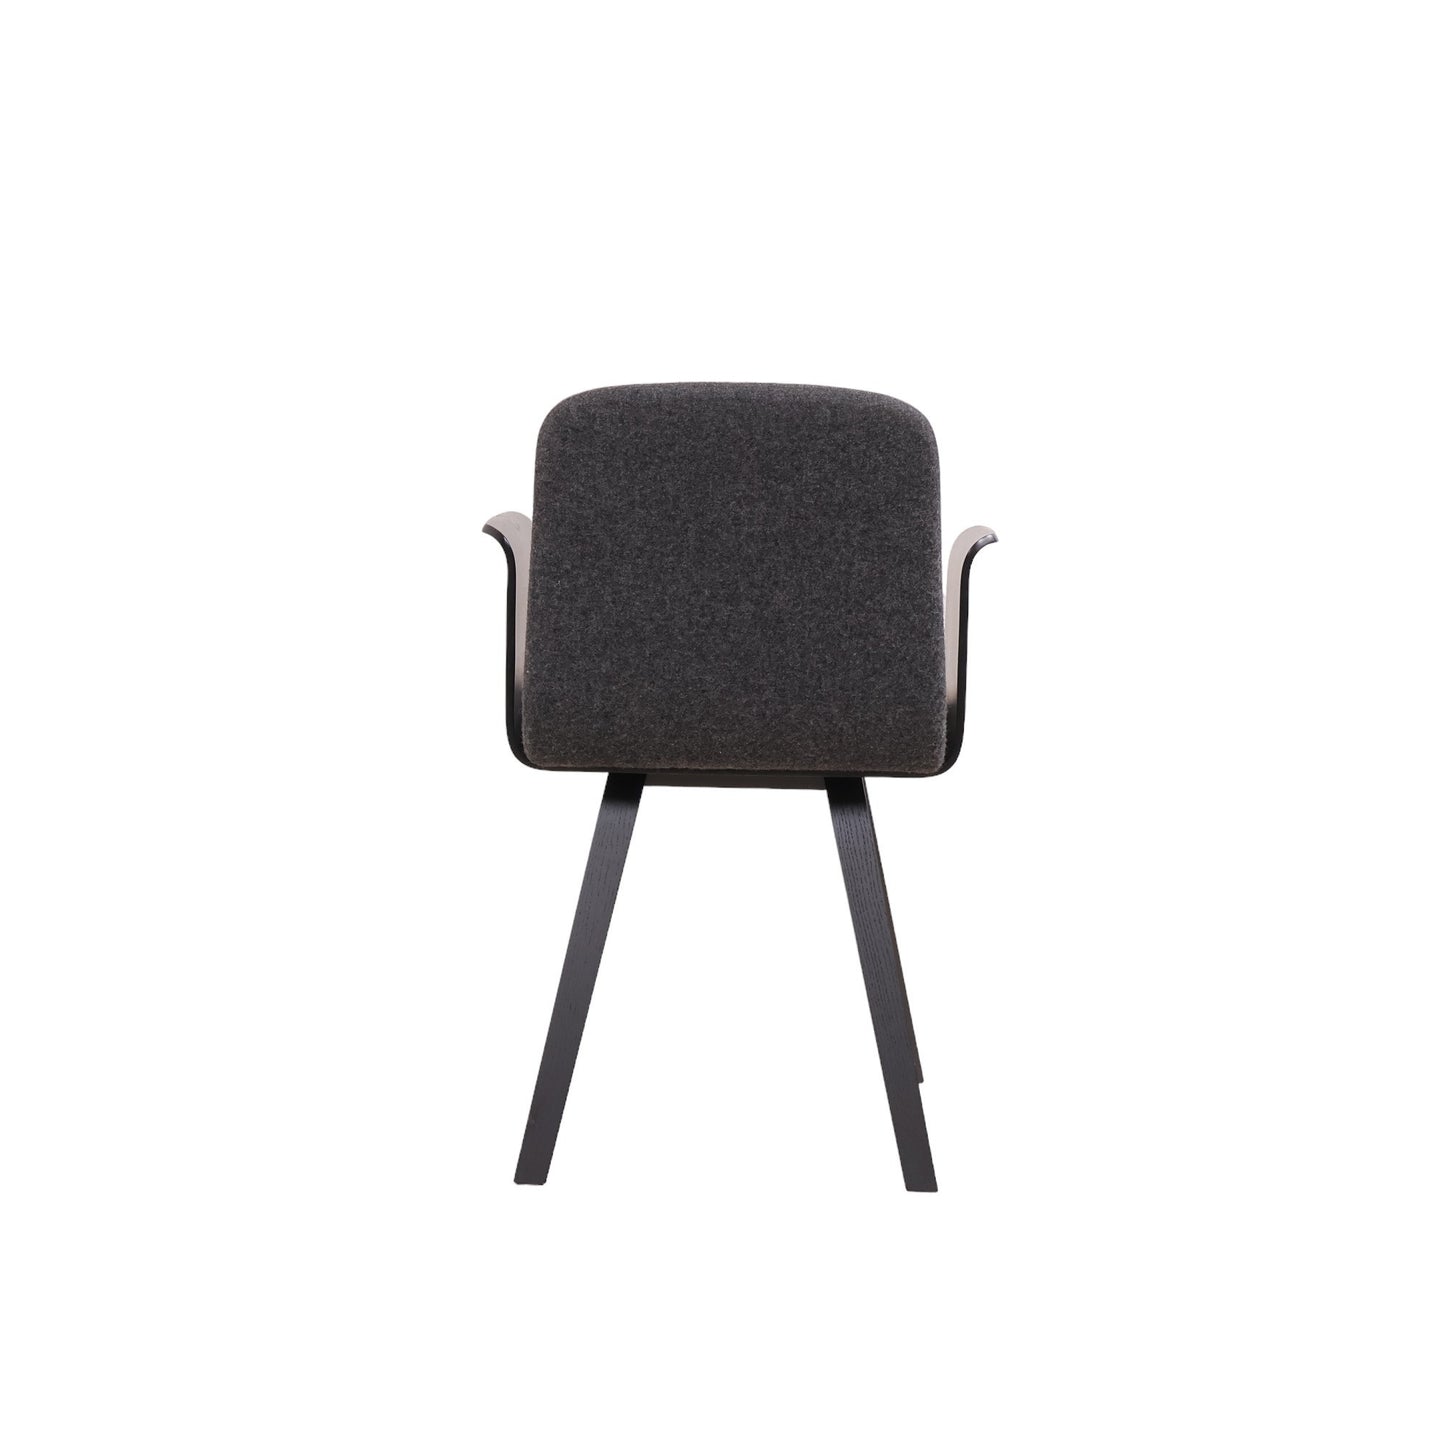 Bolia - Palm Upholstered Dining Chair with Veneered Armrest